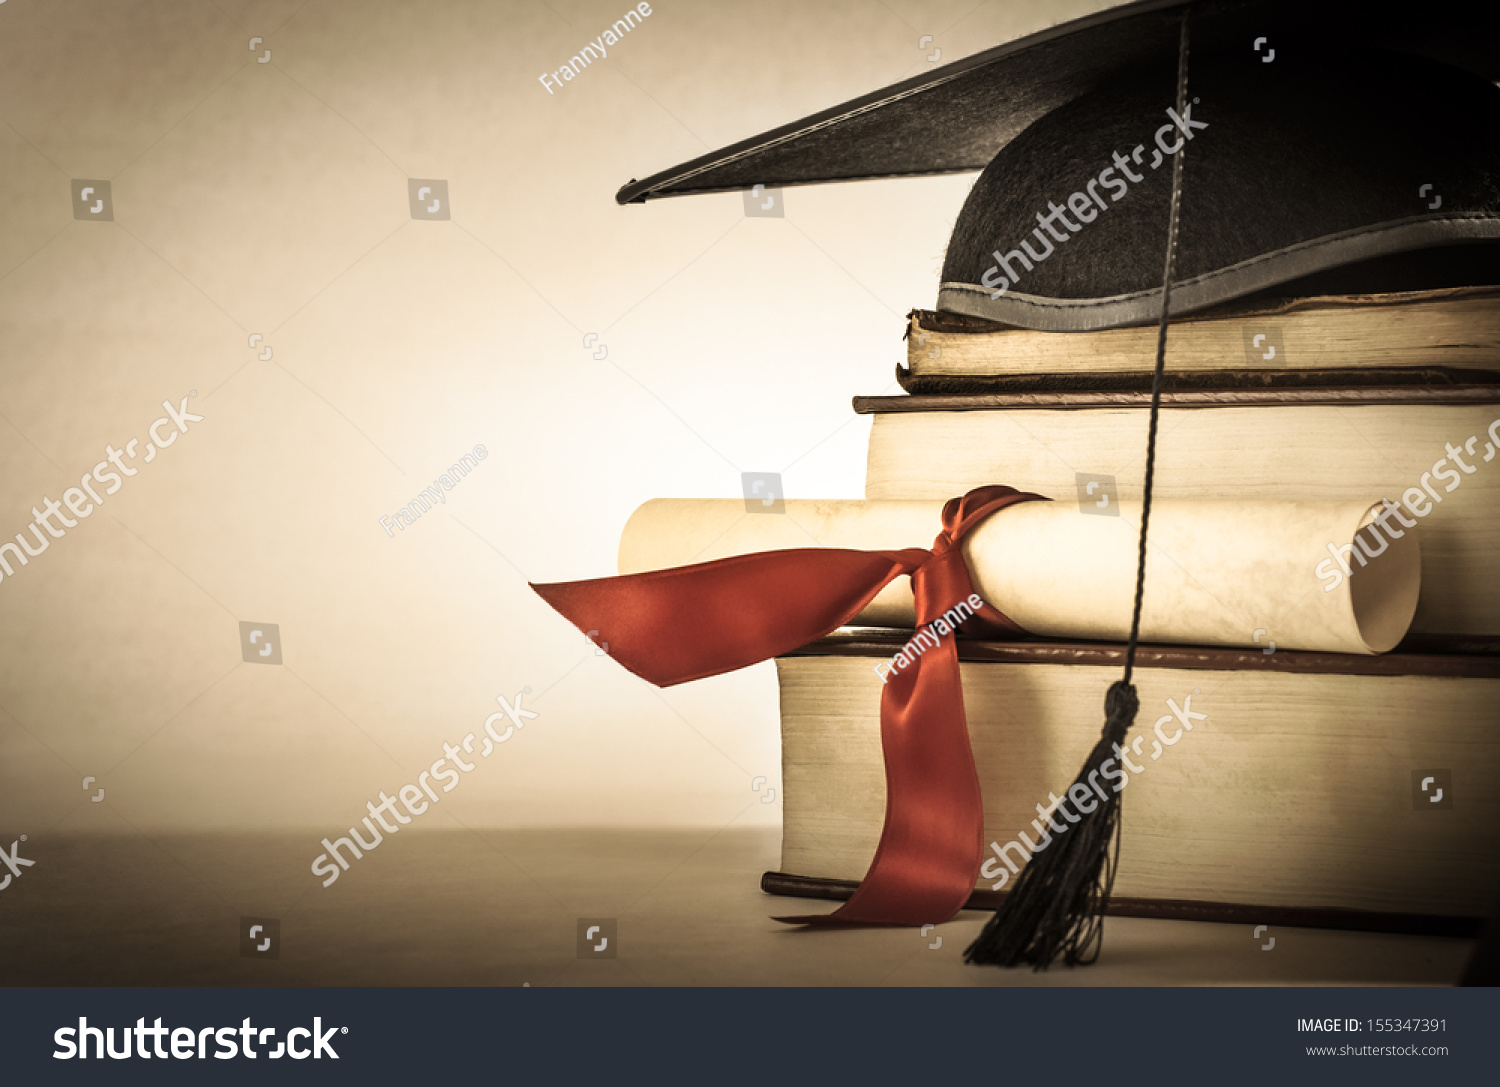 A mortarboard and graduation scroll, tied with red ribbon, on a stack of old battered book with empty space to the left.  Slightly undersaturated with vignette for vintage effect. #155347391